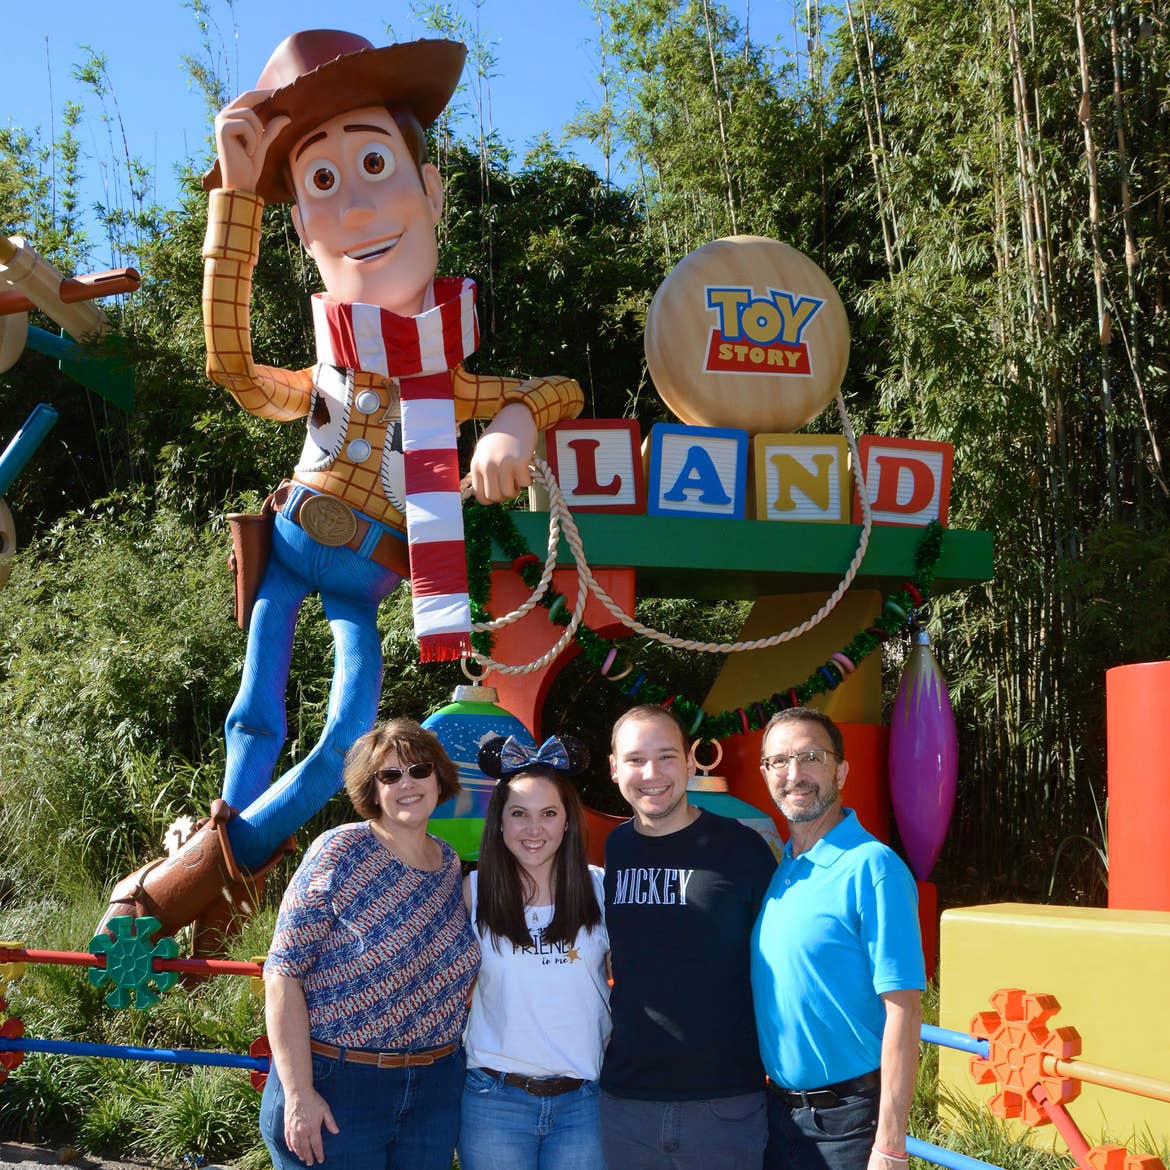 Two women and two men stand next to a scaled version of Sheriff Woody from 'Toy Story' leaning on a sign that reads 'Toy Story Land' made of toys.